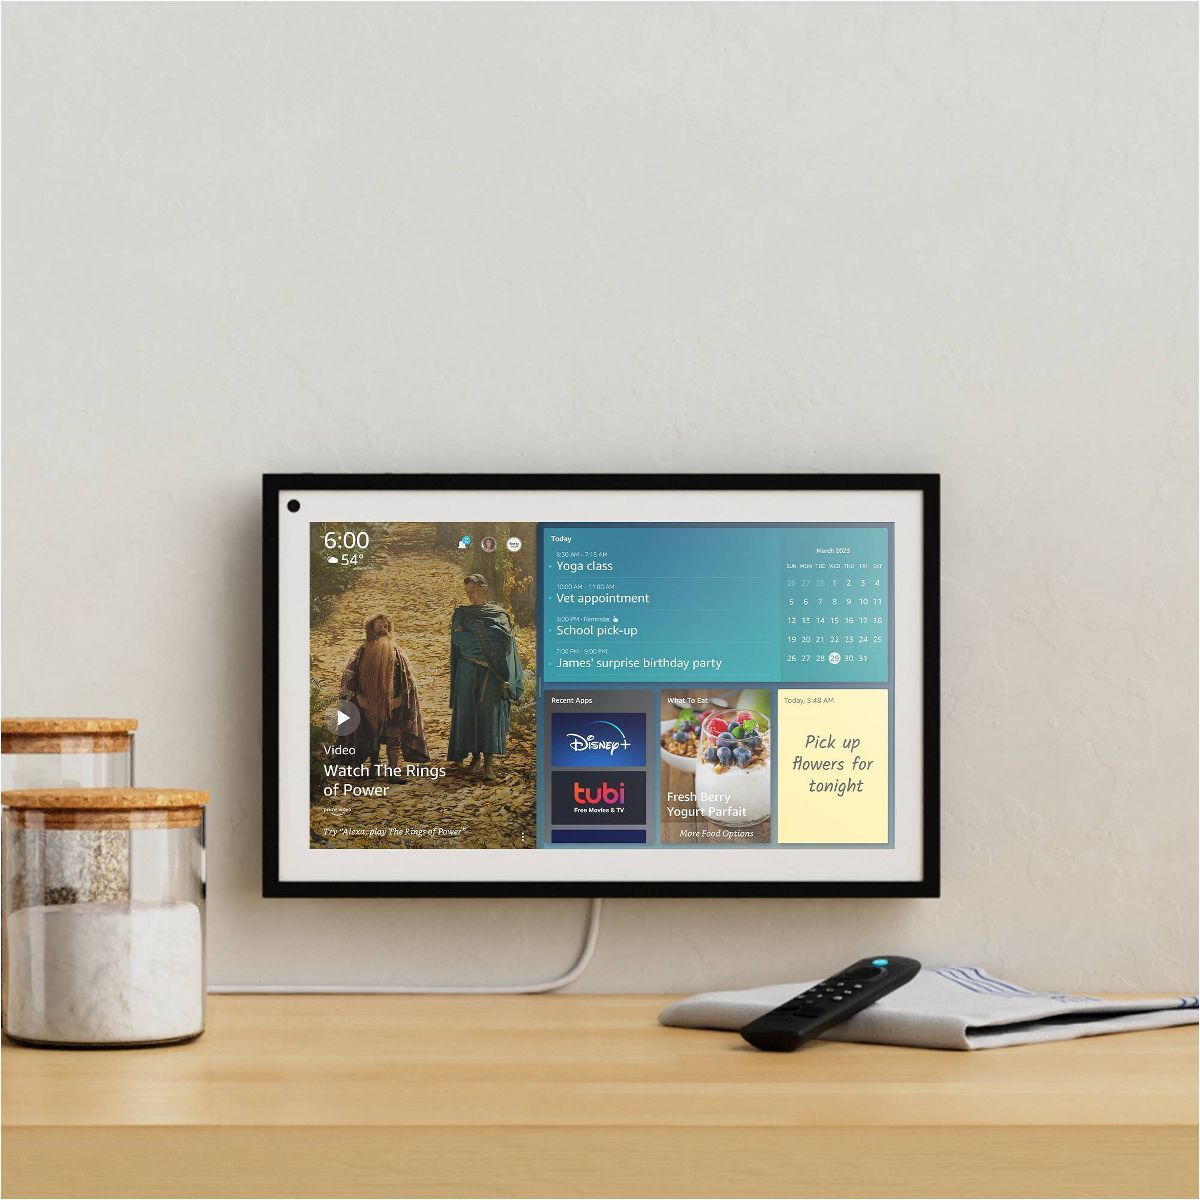 Amazon Echo Show 15 Full HD 15.6" Smart Display with Alexa and Fire TV Built-in - White | Target